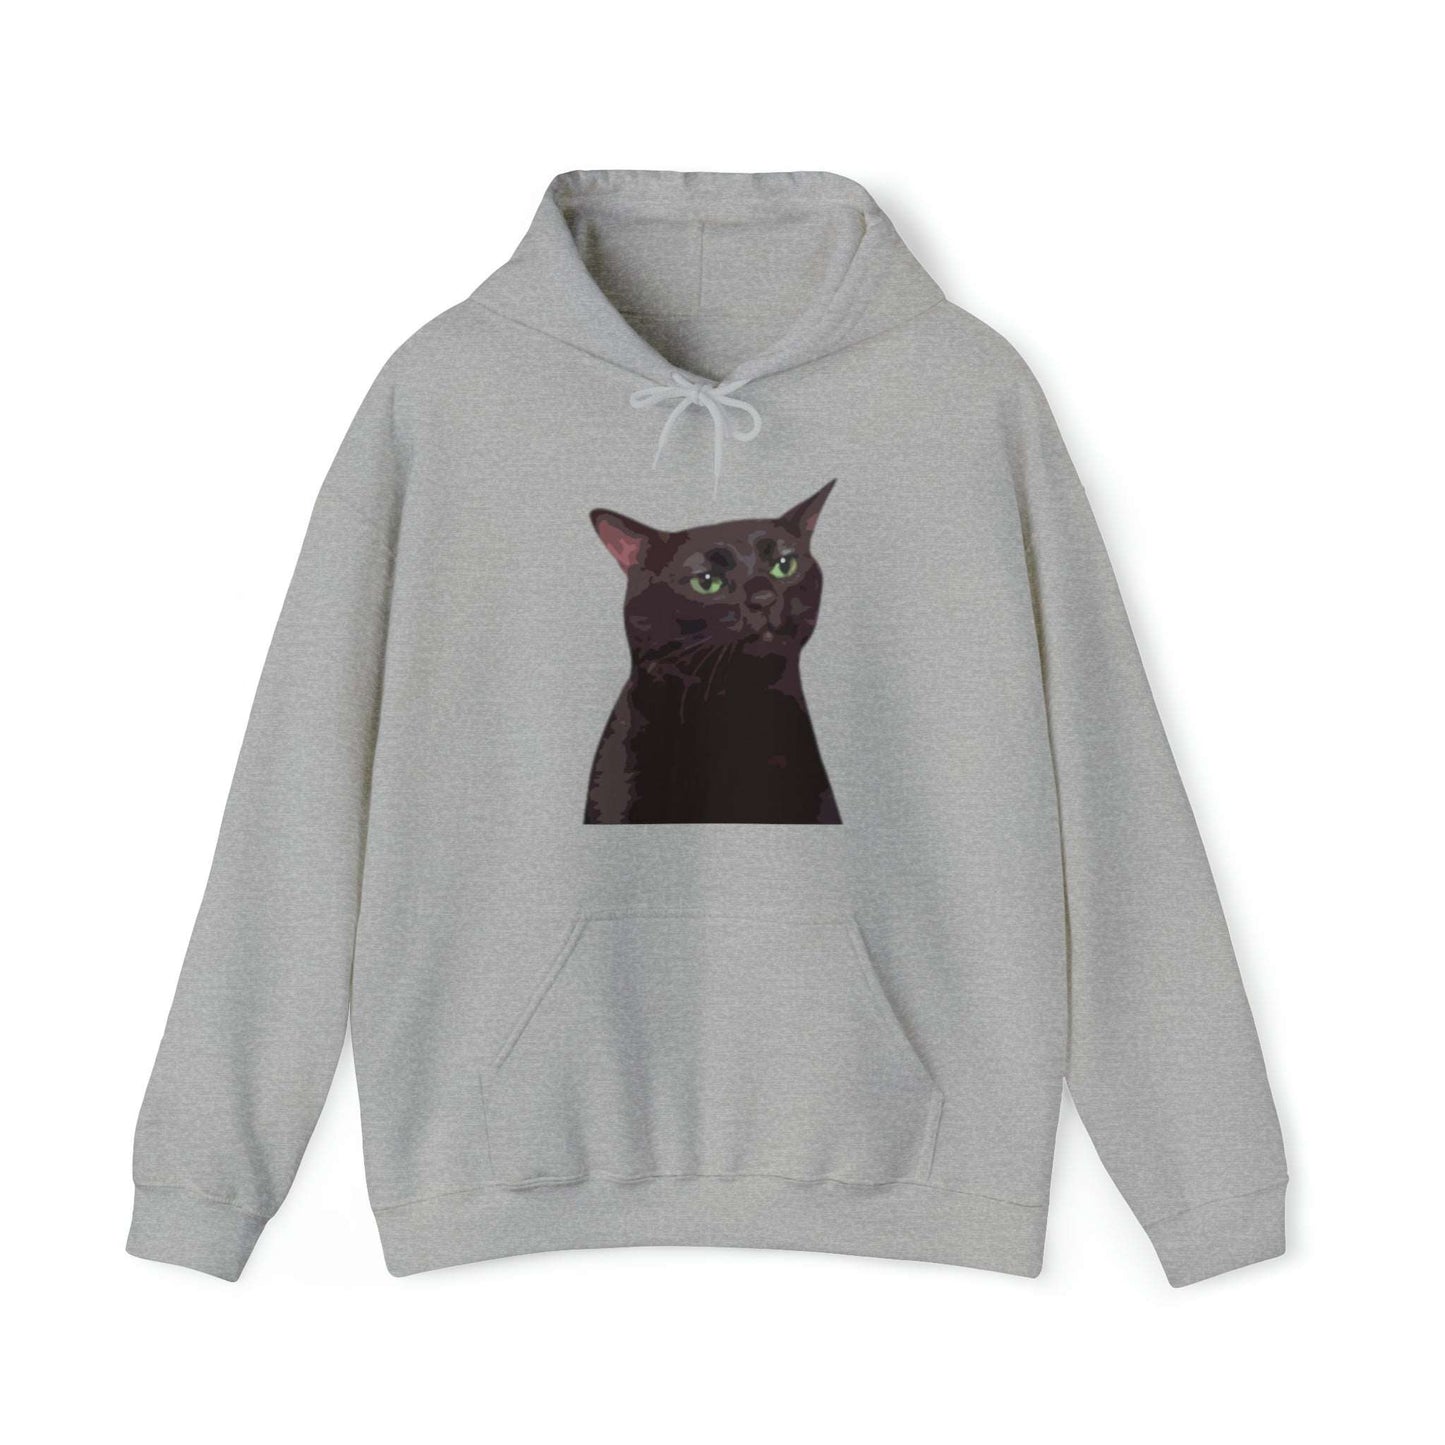 S Sport Grey Black Cat Zoning Out Hoodie from HoodySZN.com